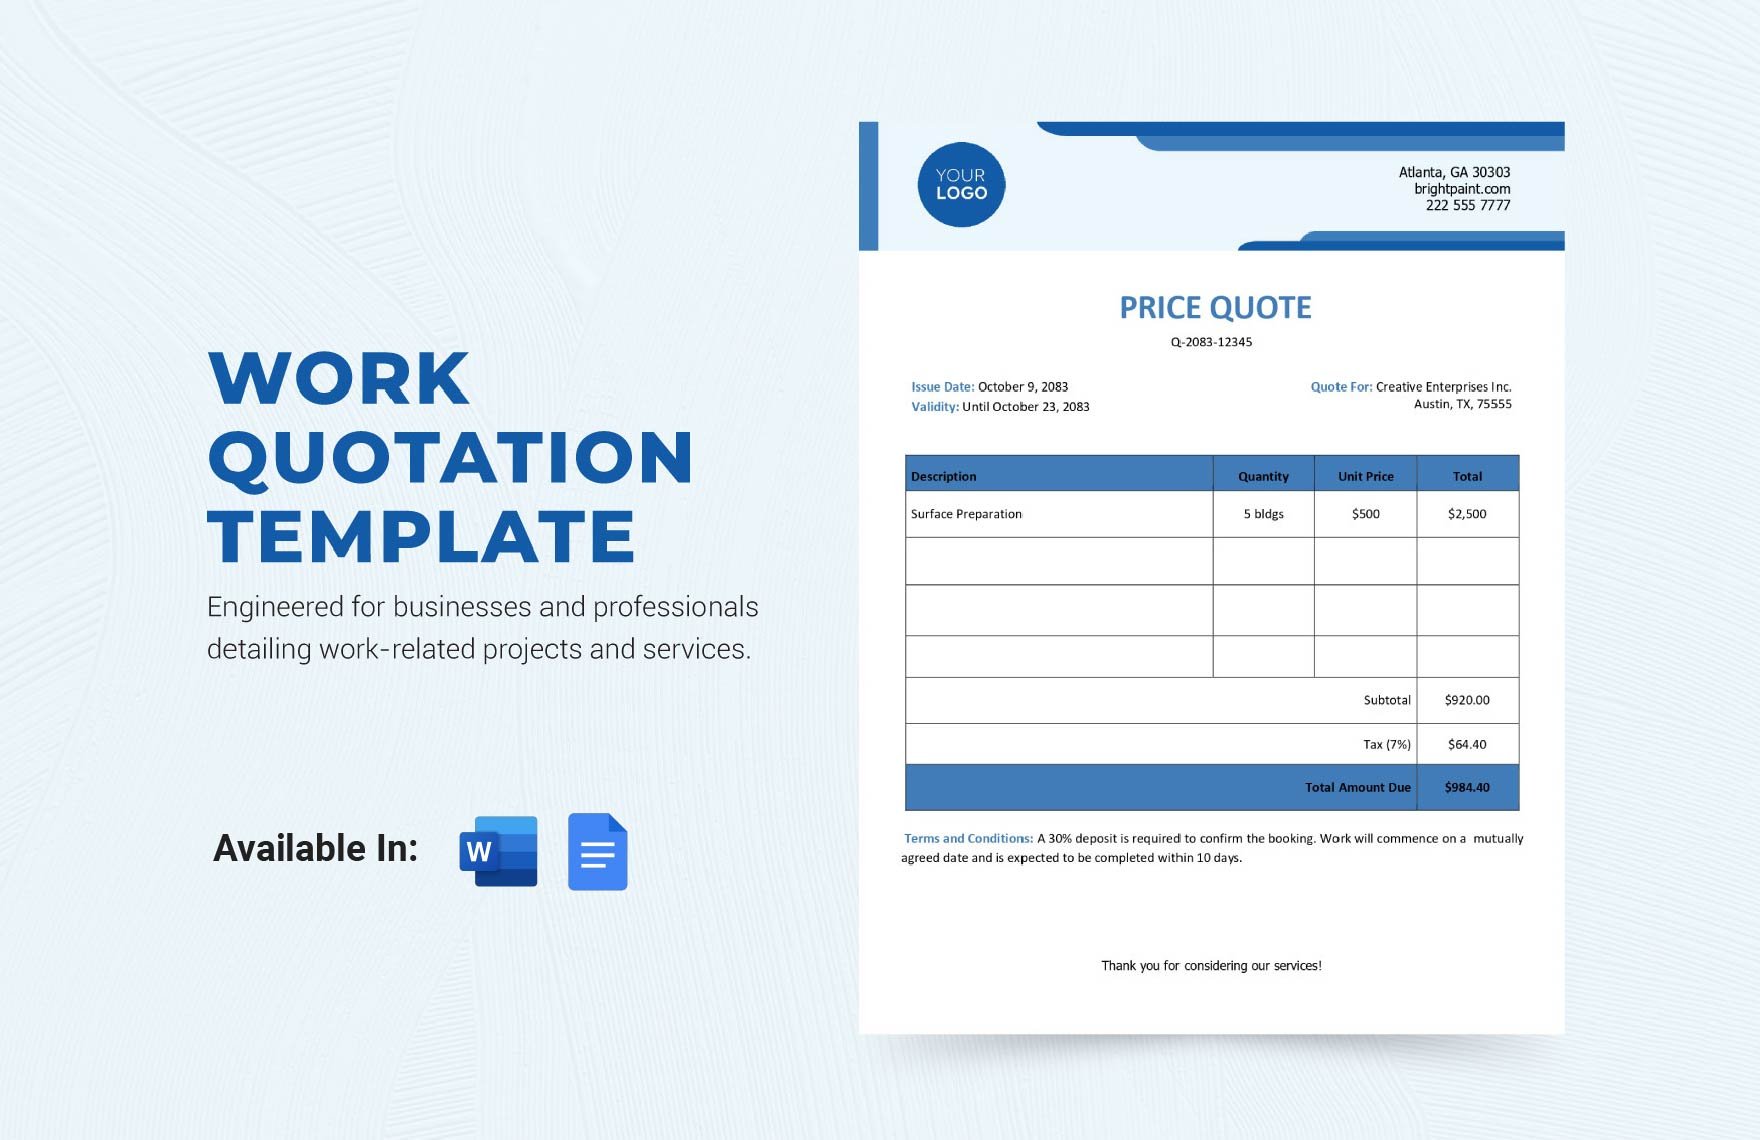 Work Quotation Template in Word, Google Docs